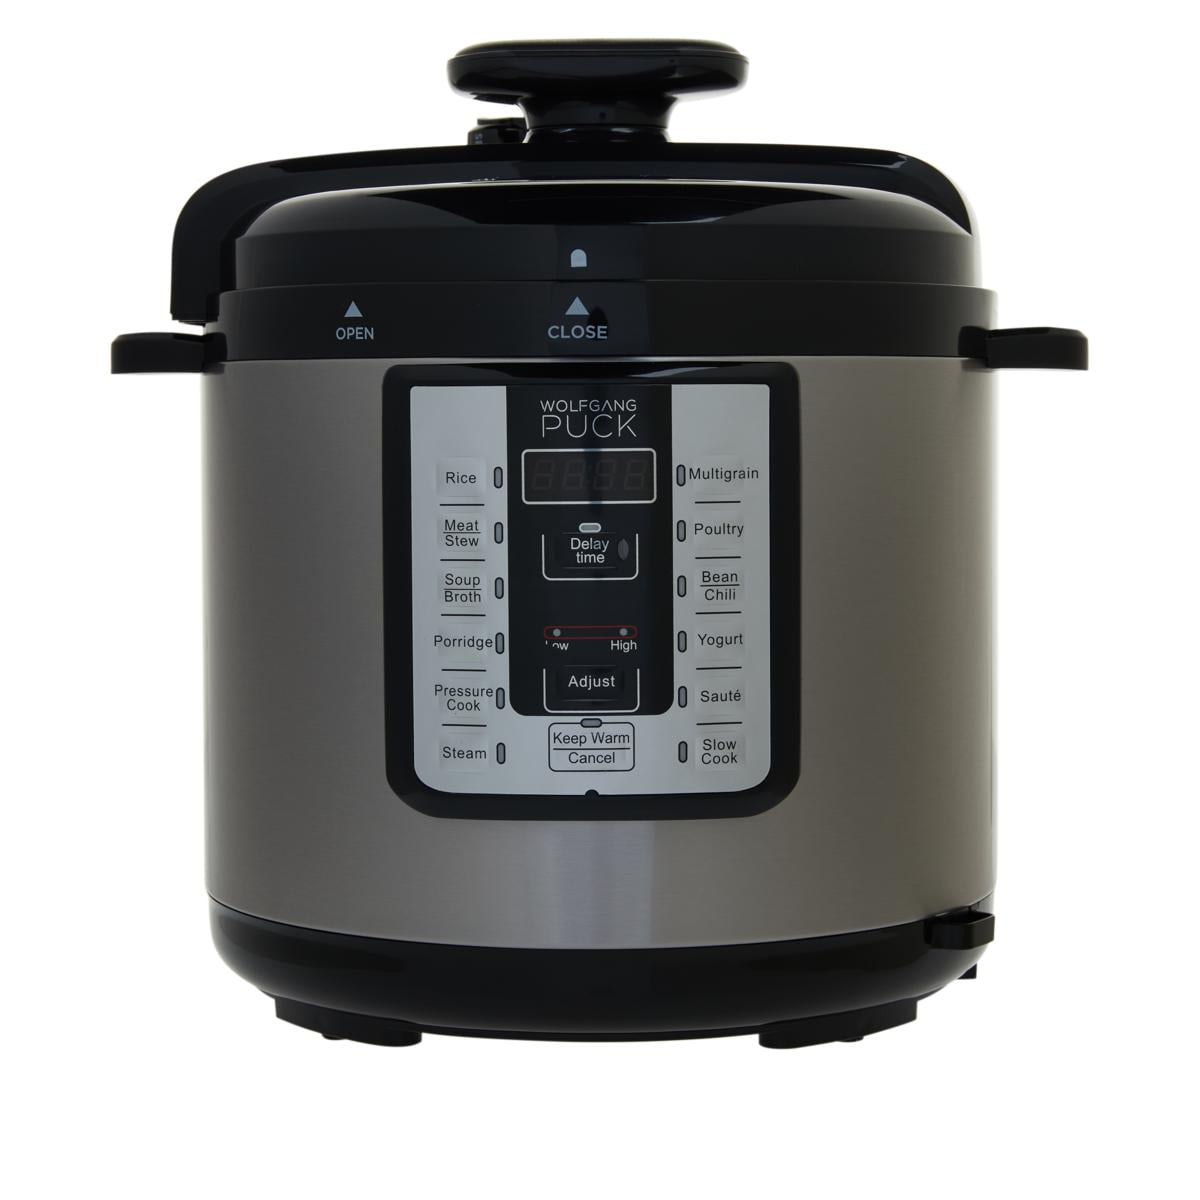 10 in 1 High Quality Wolfgang Puck 6 Quart Electric Pressure